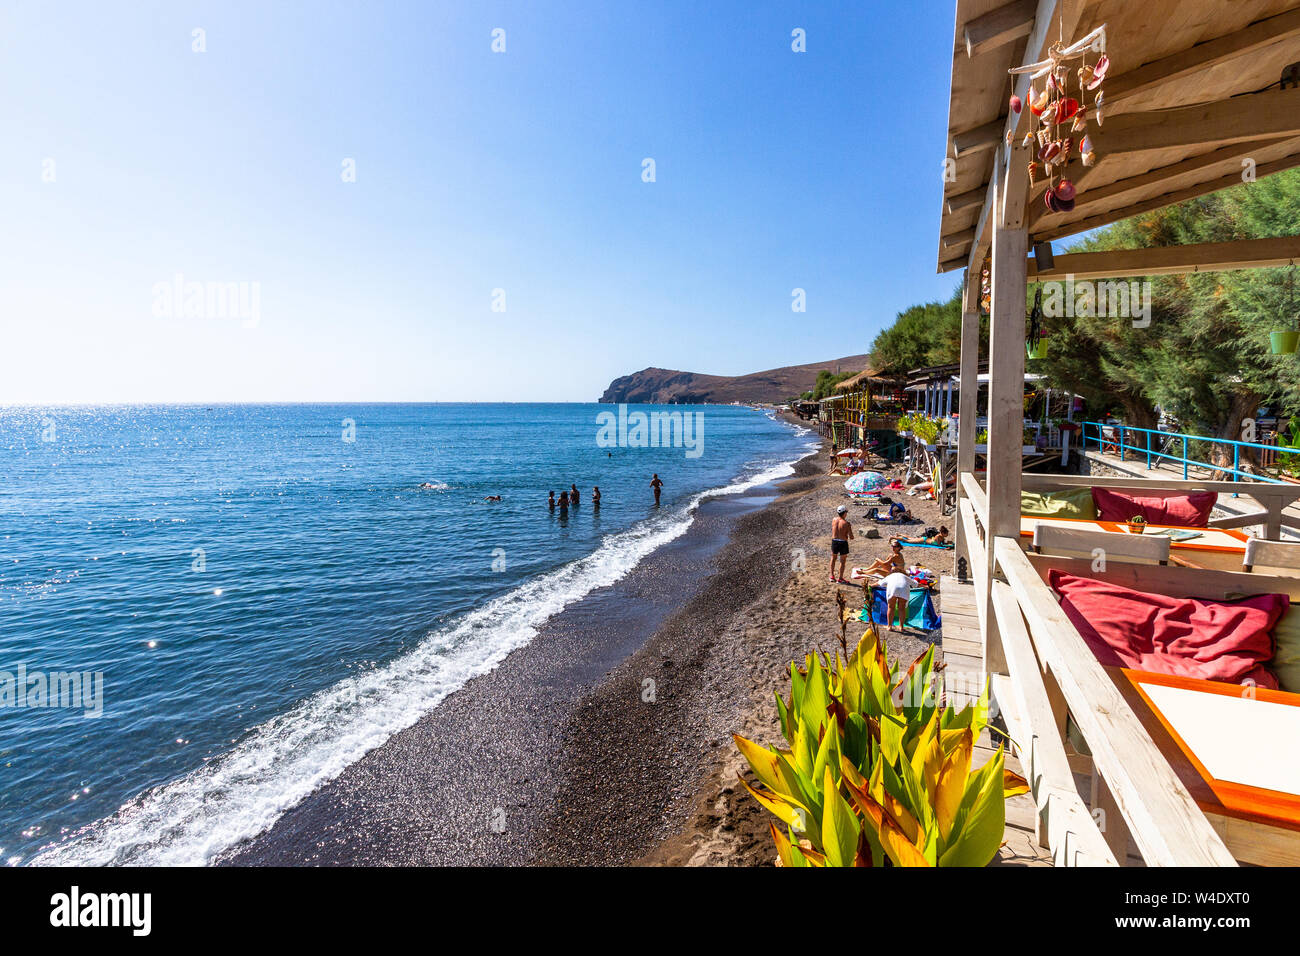 At the beach bars of Skala Eressos, of the most popular touristic destinations in Lesbos island, Greece. Stock Photo